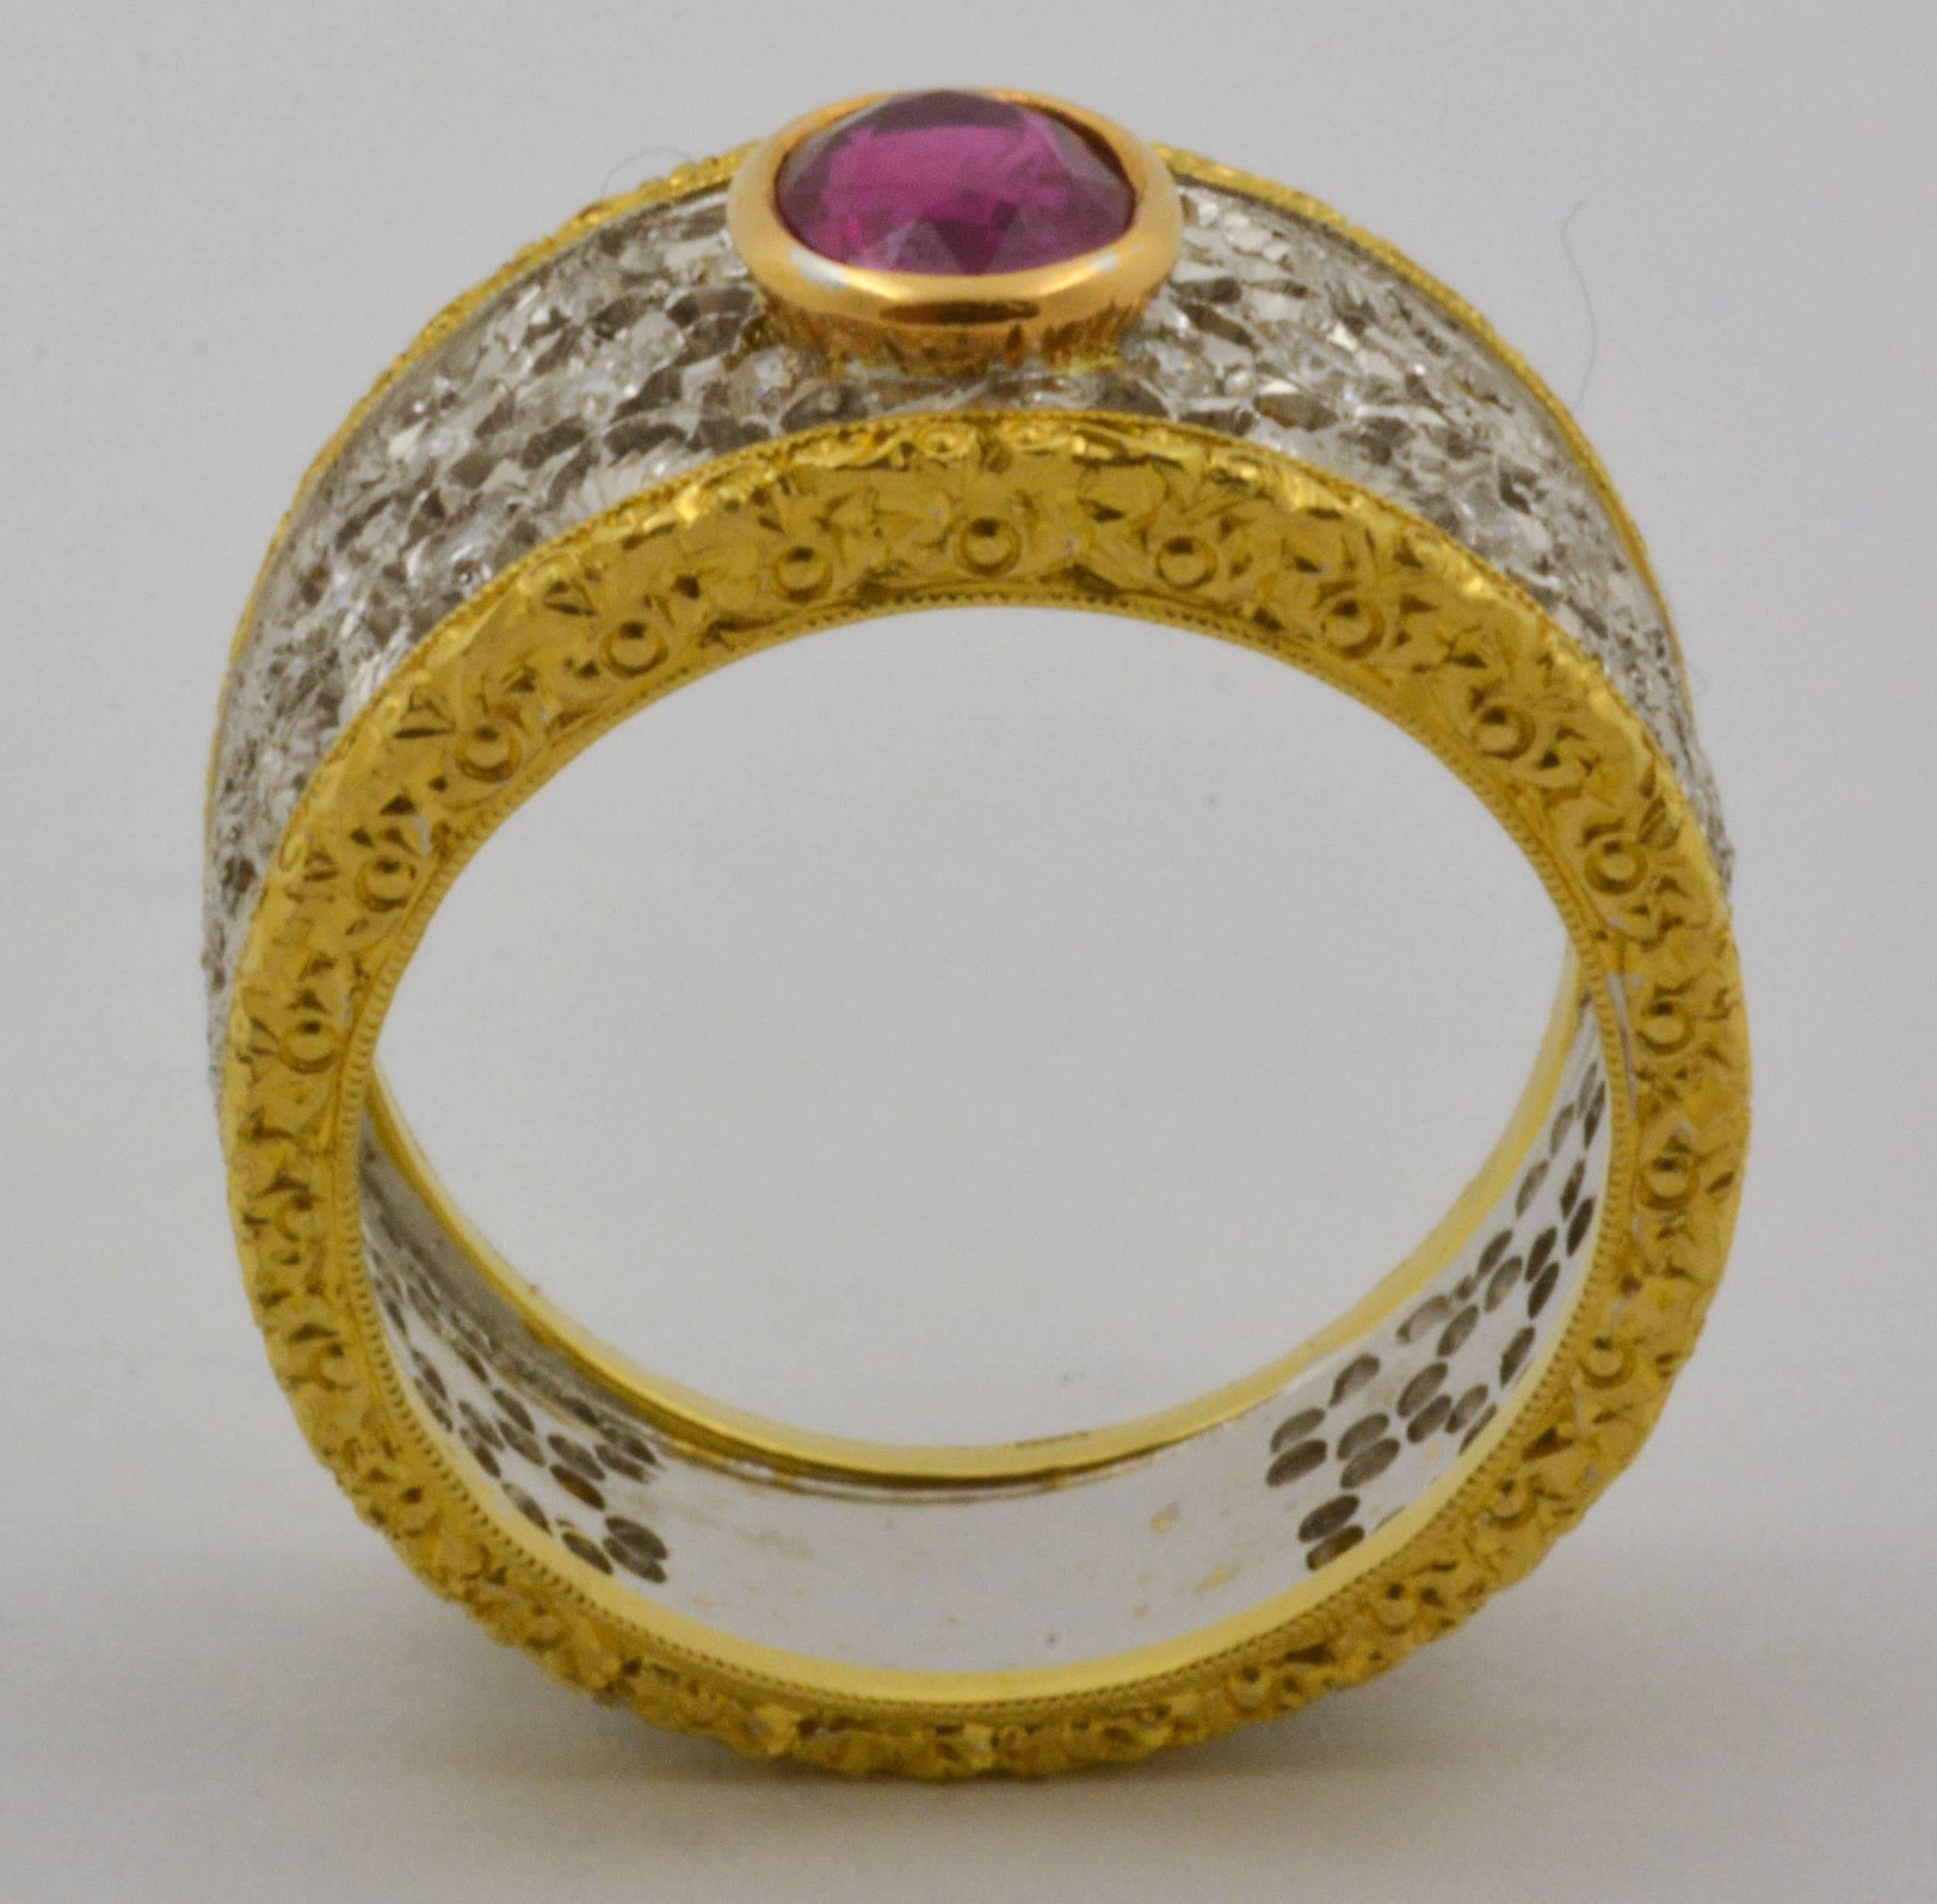 Maini Gioielli Ruby Two Color Gold Bezel Set Filigree Floral Ring 4